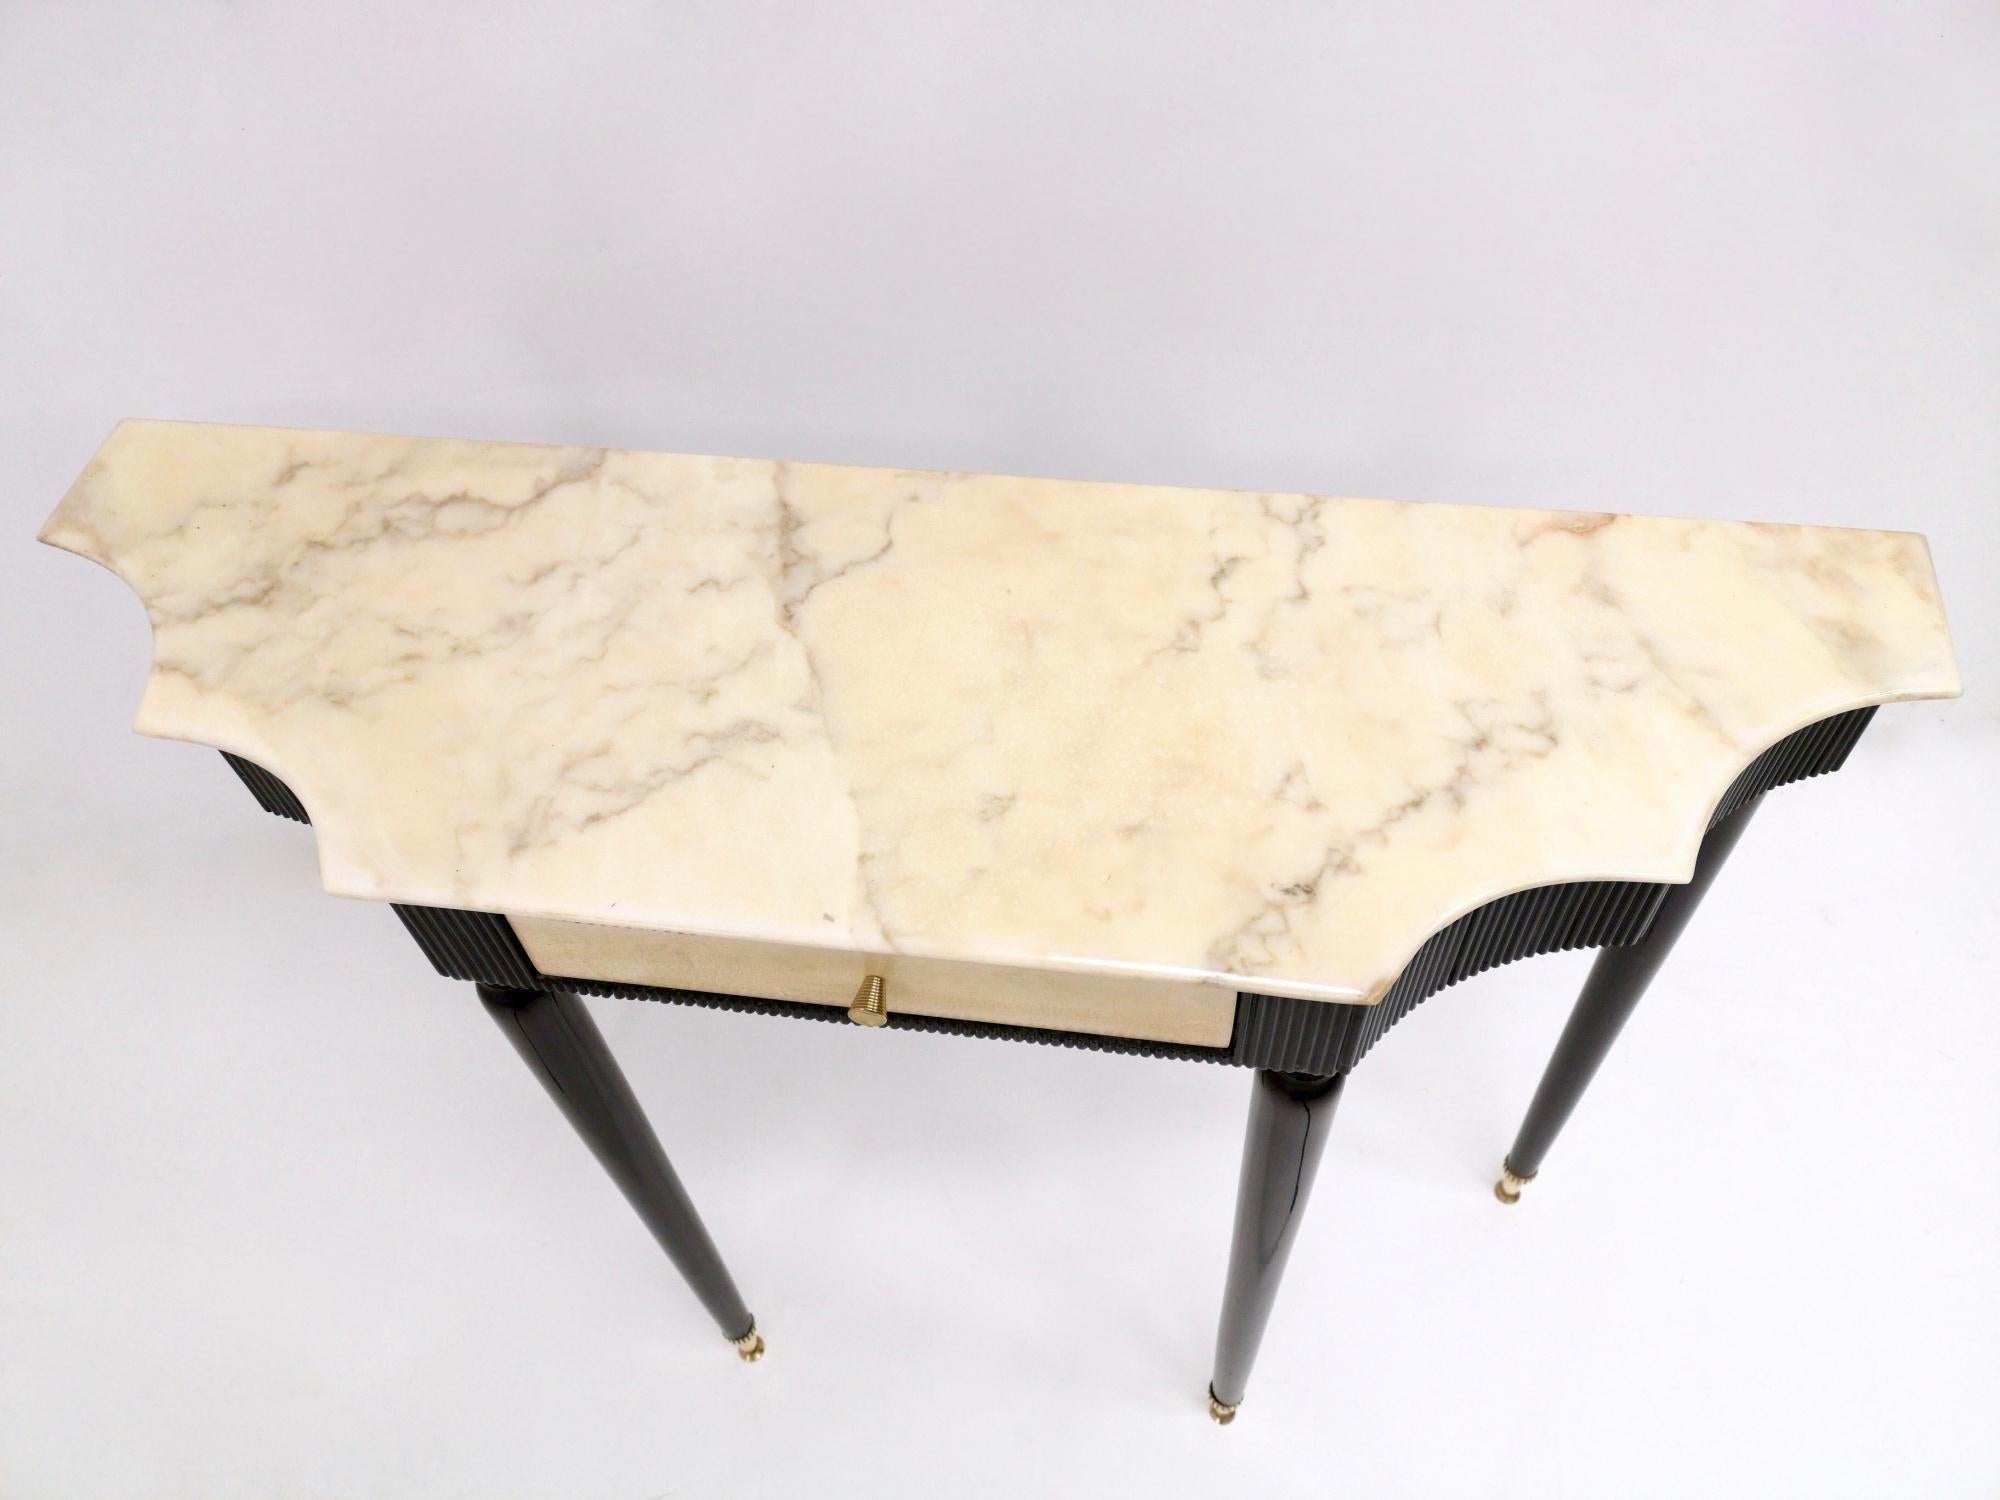 Brass Midcentury Ebonized Console Table with Portuguese Pink Marble Top, Italy, 1950s